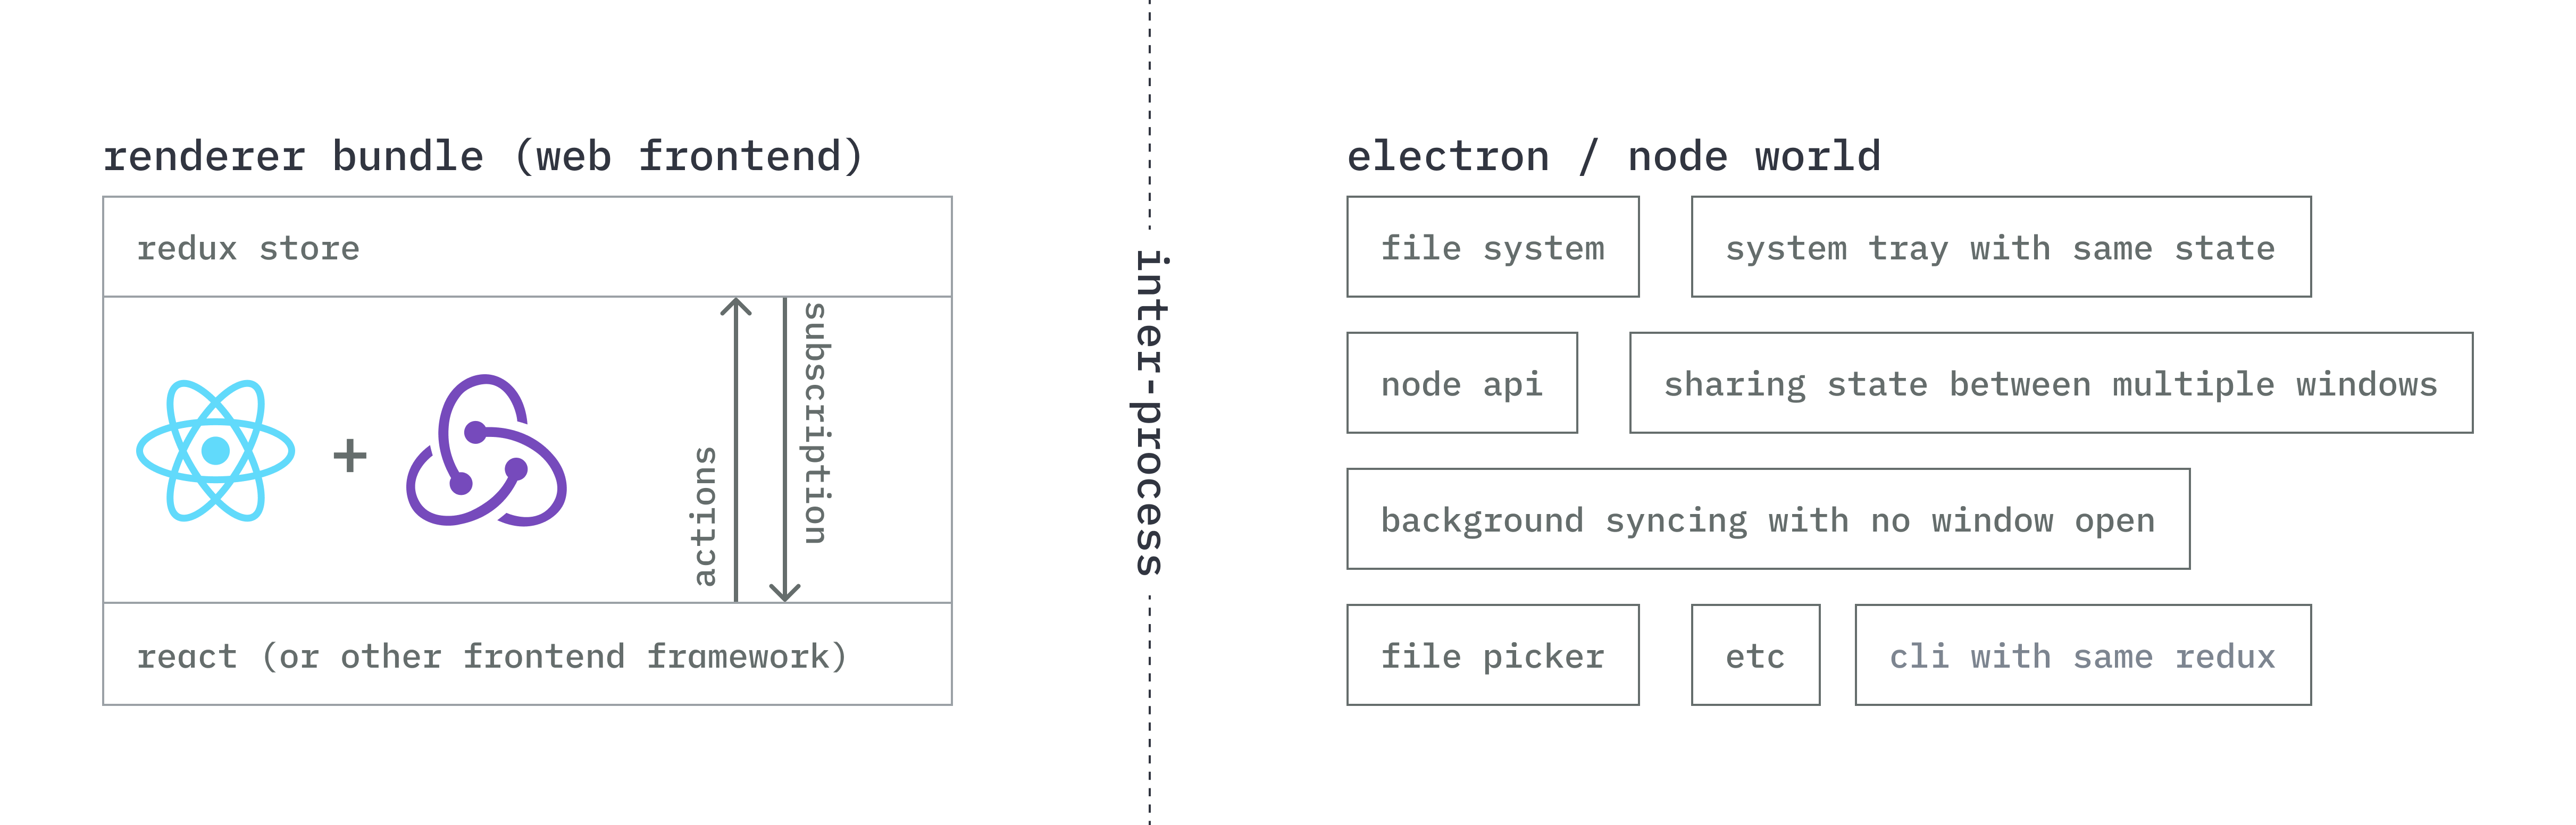 diagram containing a typical react + redux setup on the left, several electron and node.js specific api on the right, and a vertical line on the middle written 'inter-process'